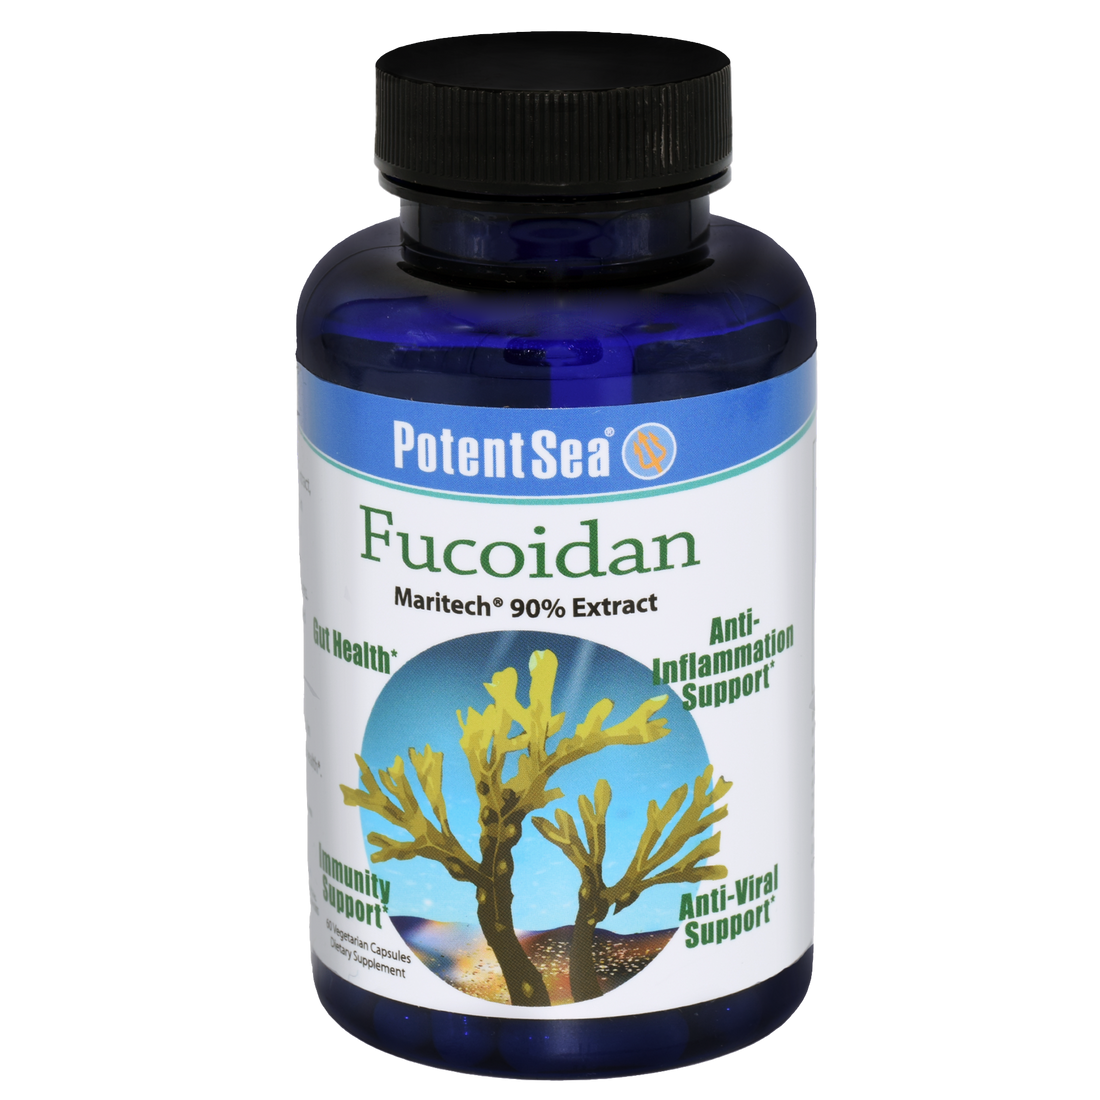 Check out or new product Fucoidan!!